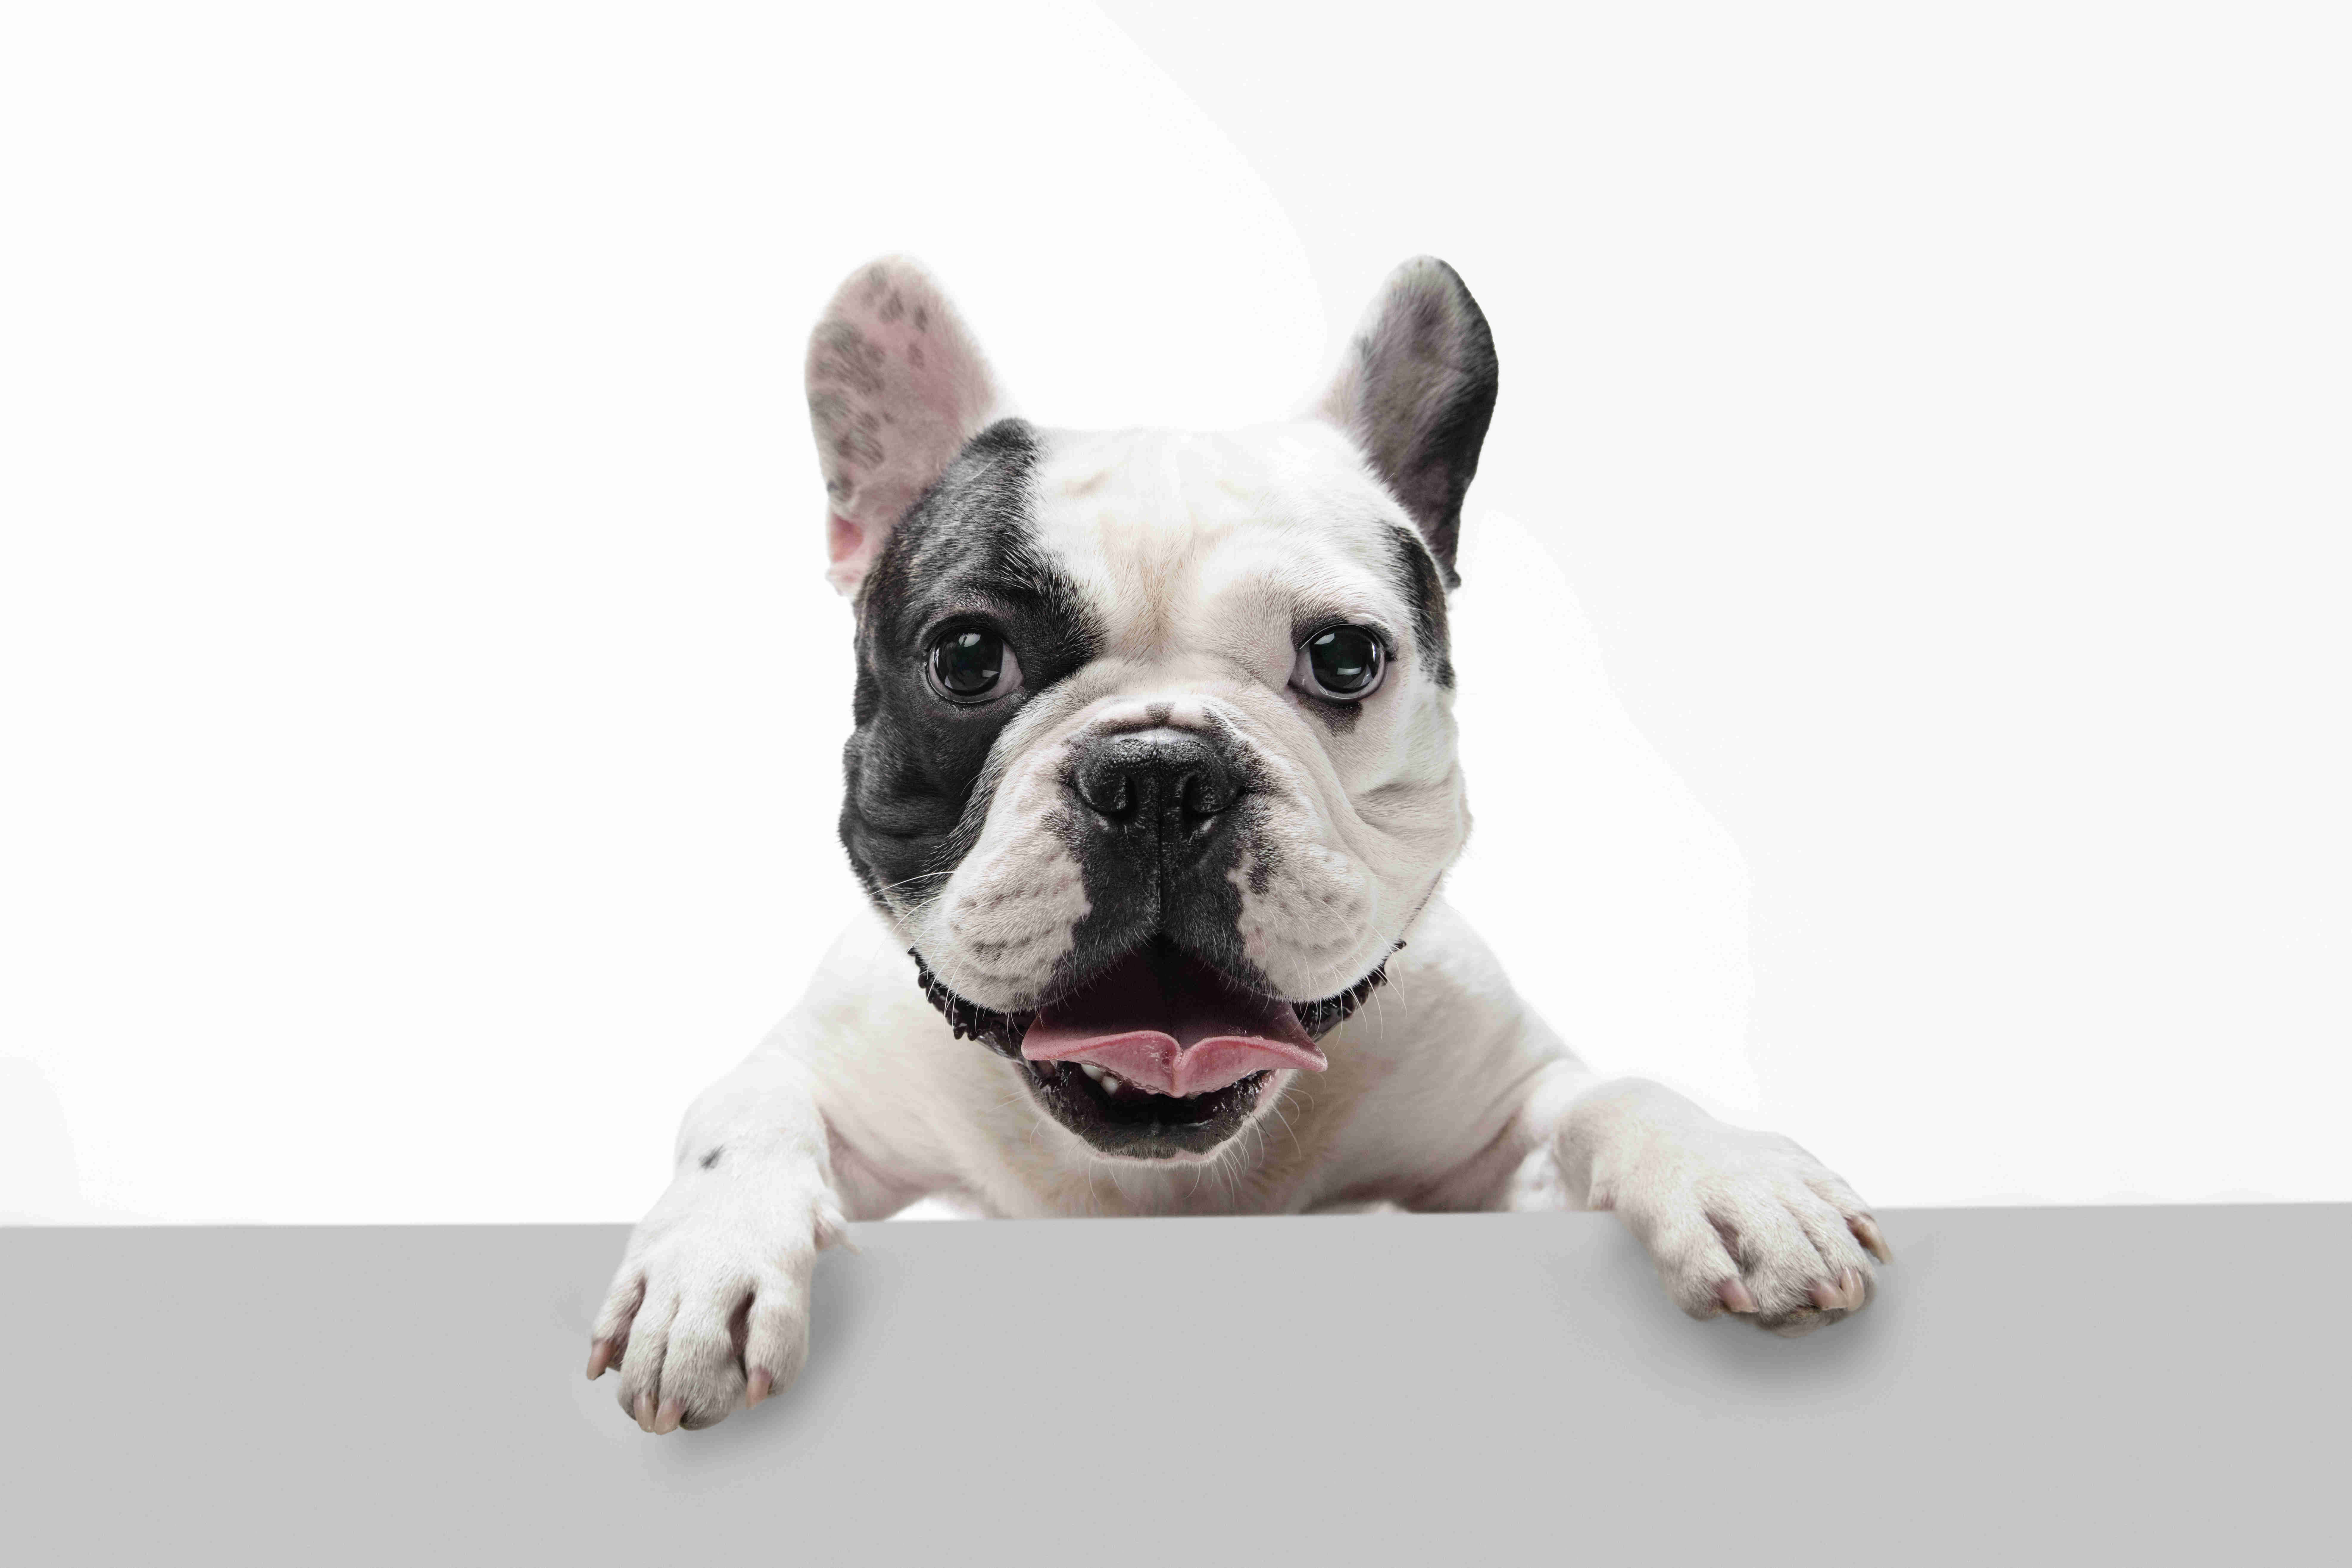 Top 5 Indicators of a High-Quality French Bulldog Puppy: What to Look for When Choosing Your Frenchie